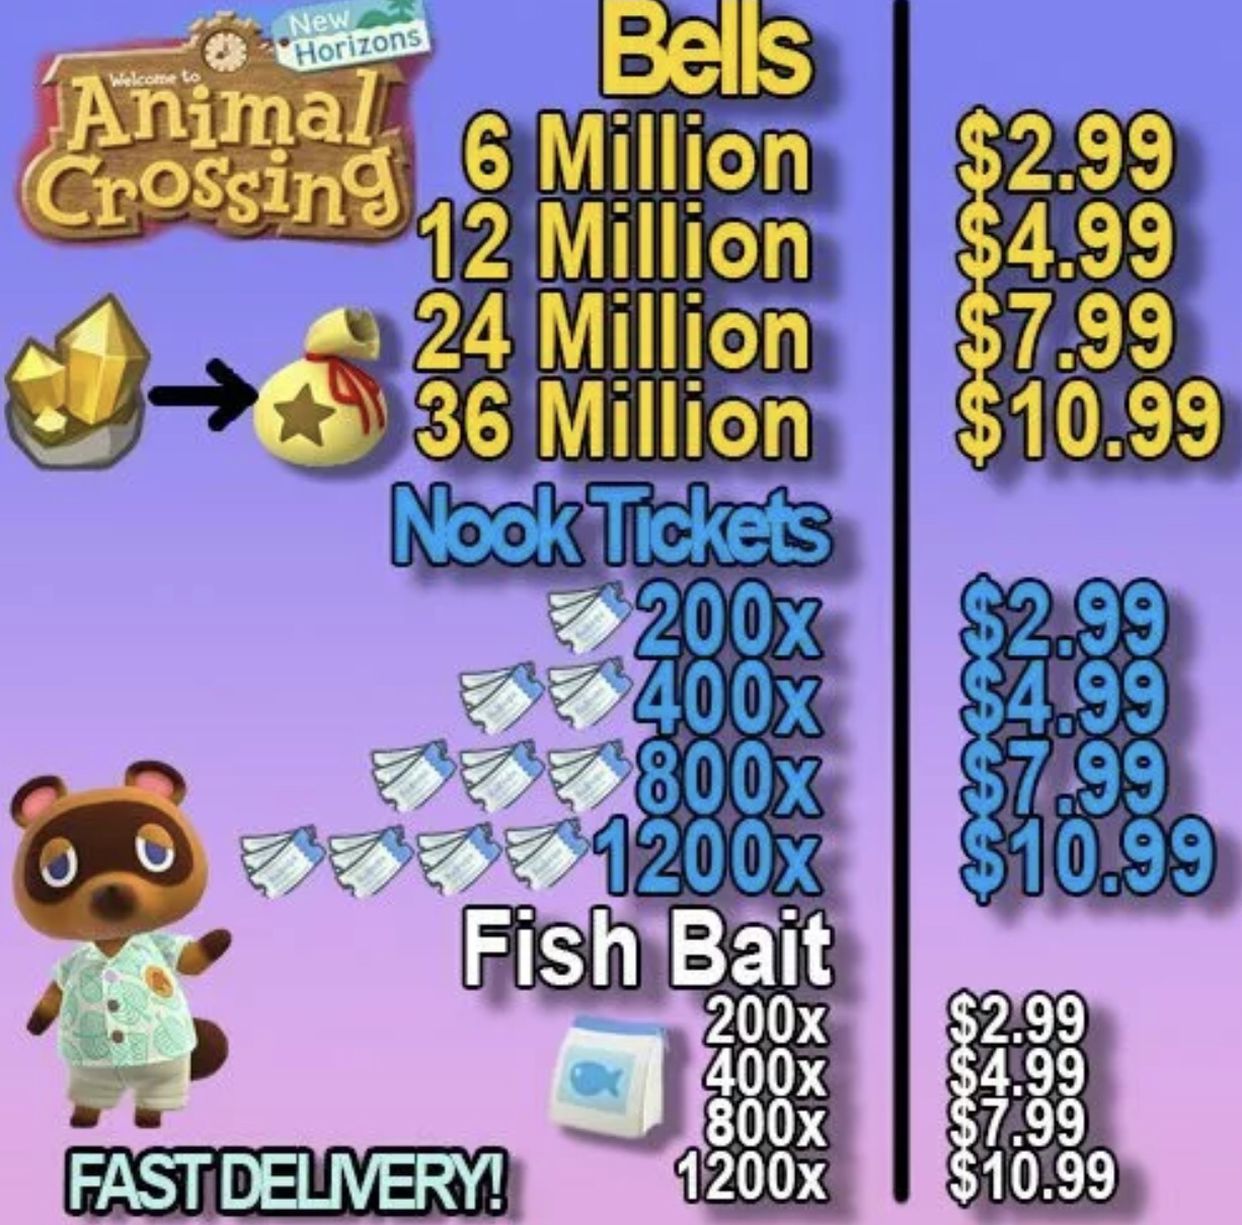 Nintendo Switch Animal Crossing Items Bells NMT (full Inventory For $5)(12 Million Bells Or 400 NMT)